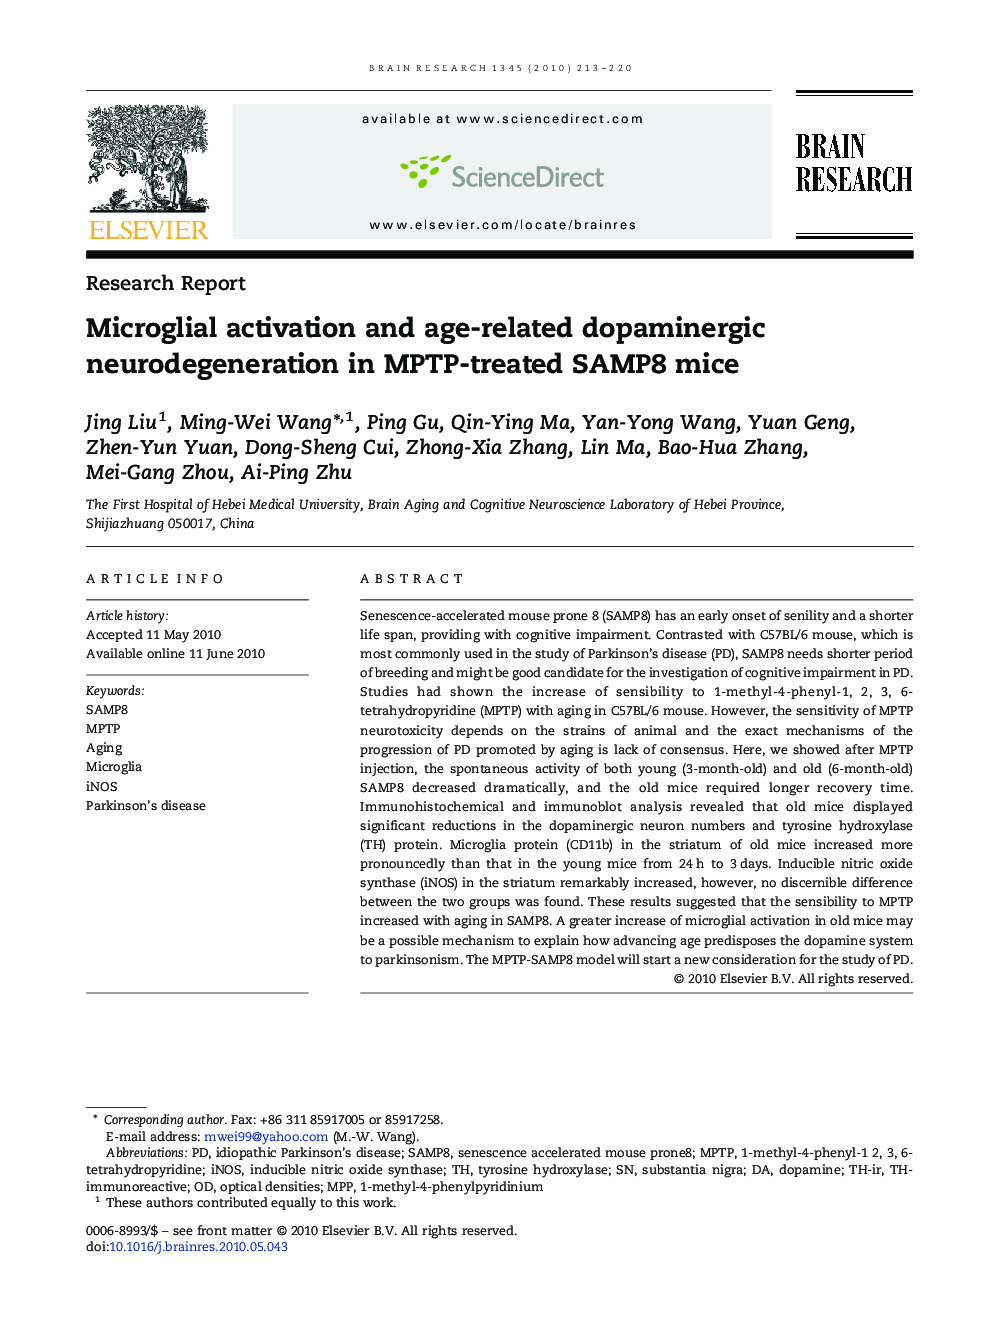 Microglial activation and age-related dopaminergic neurodegeneration in MPTP-treated SAMP8 mice